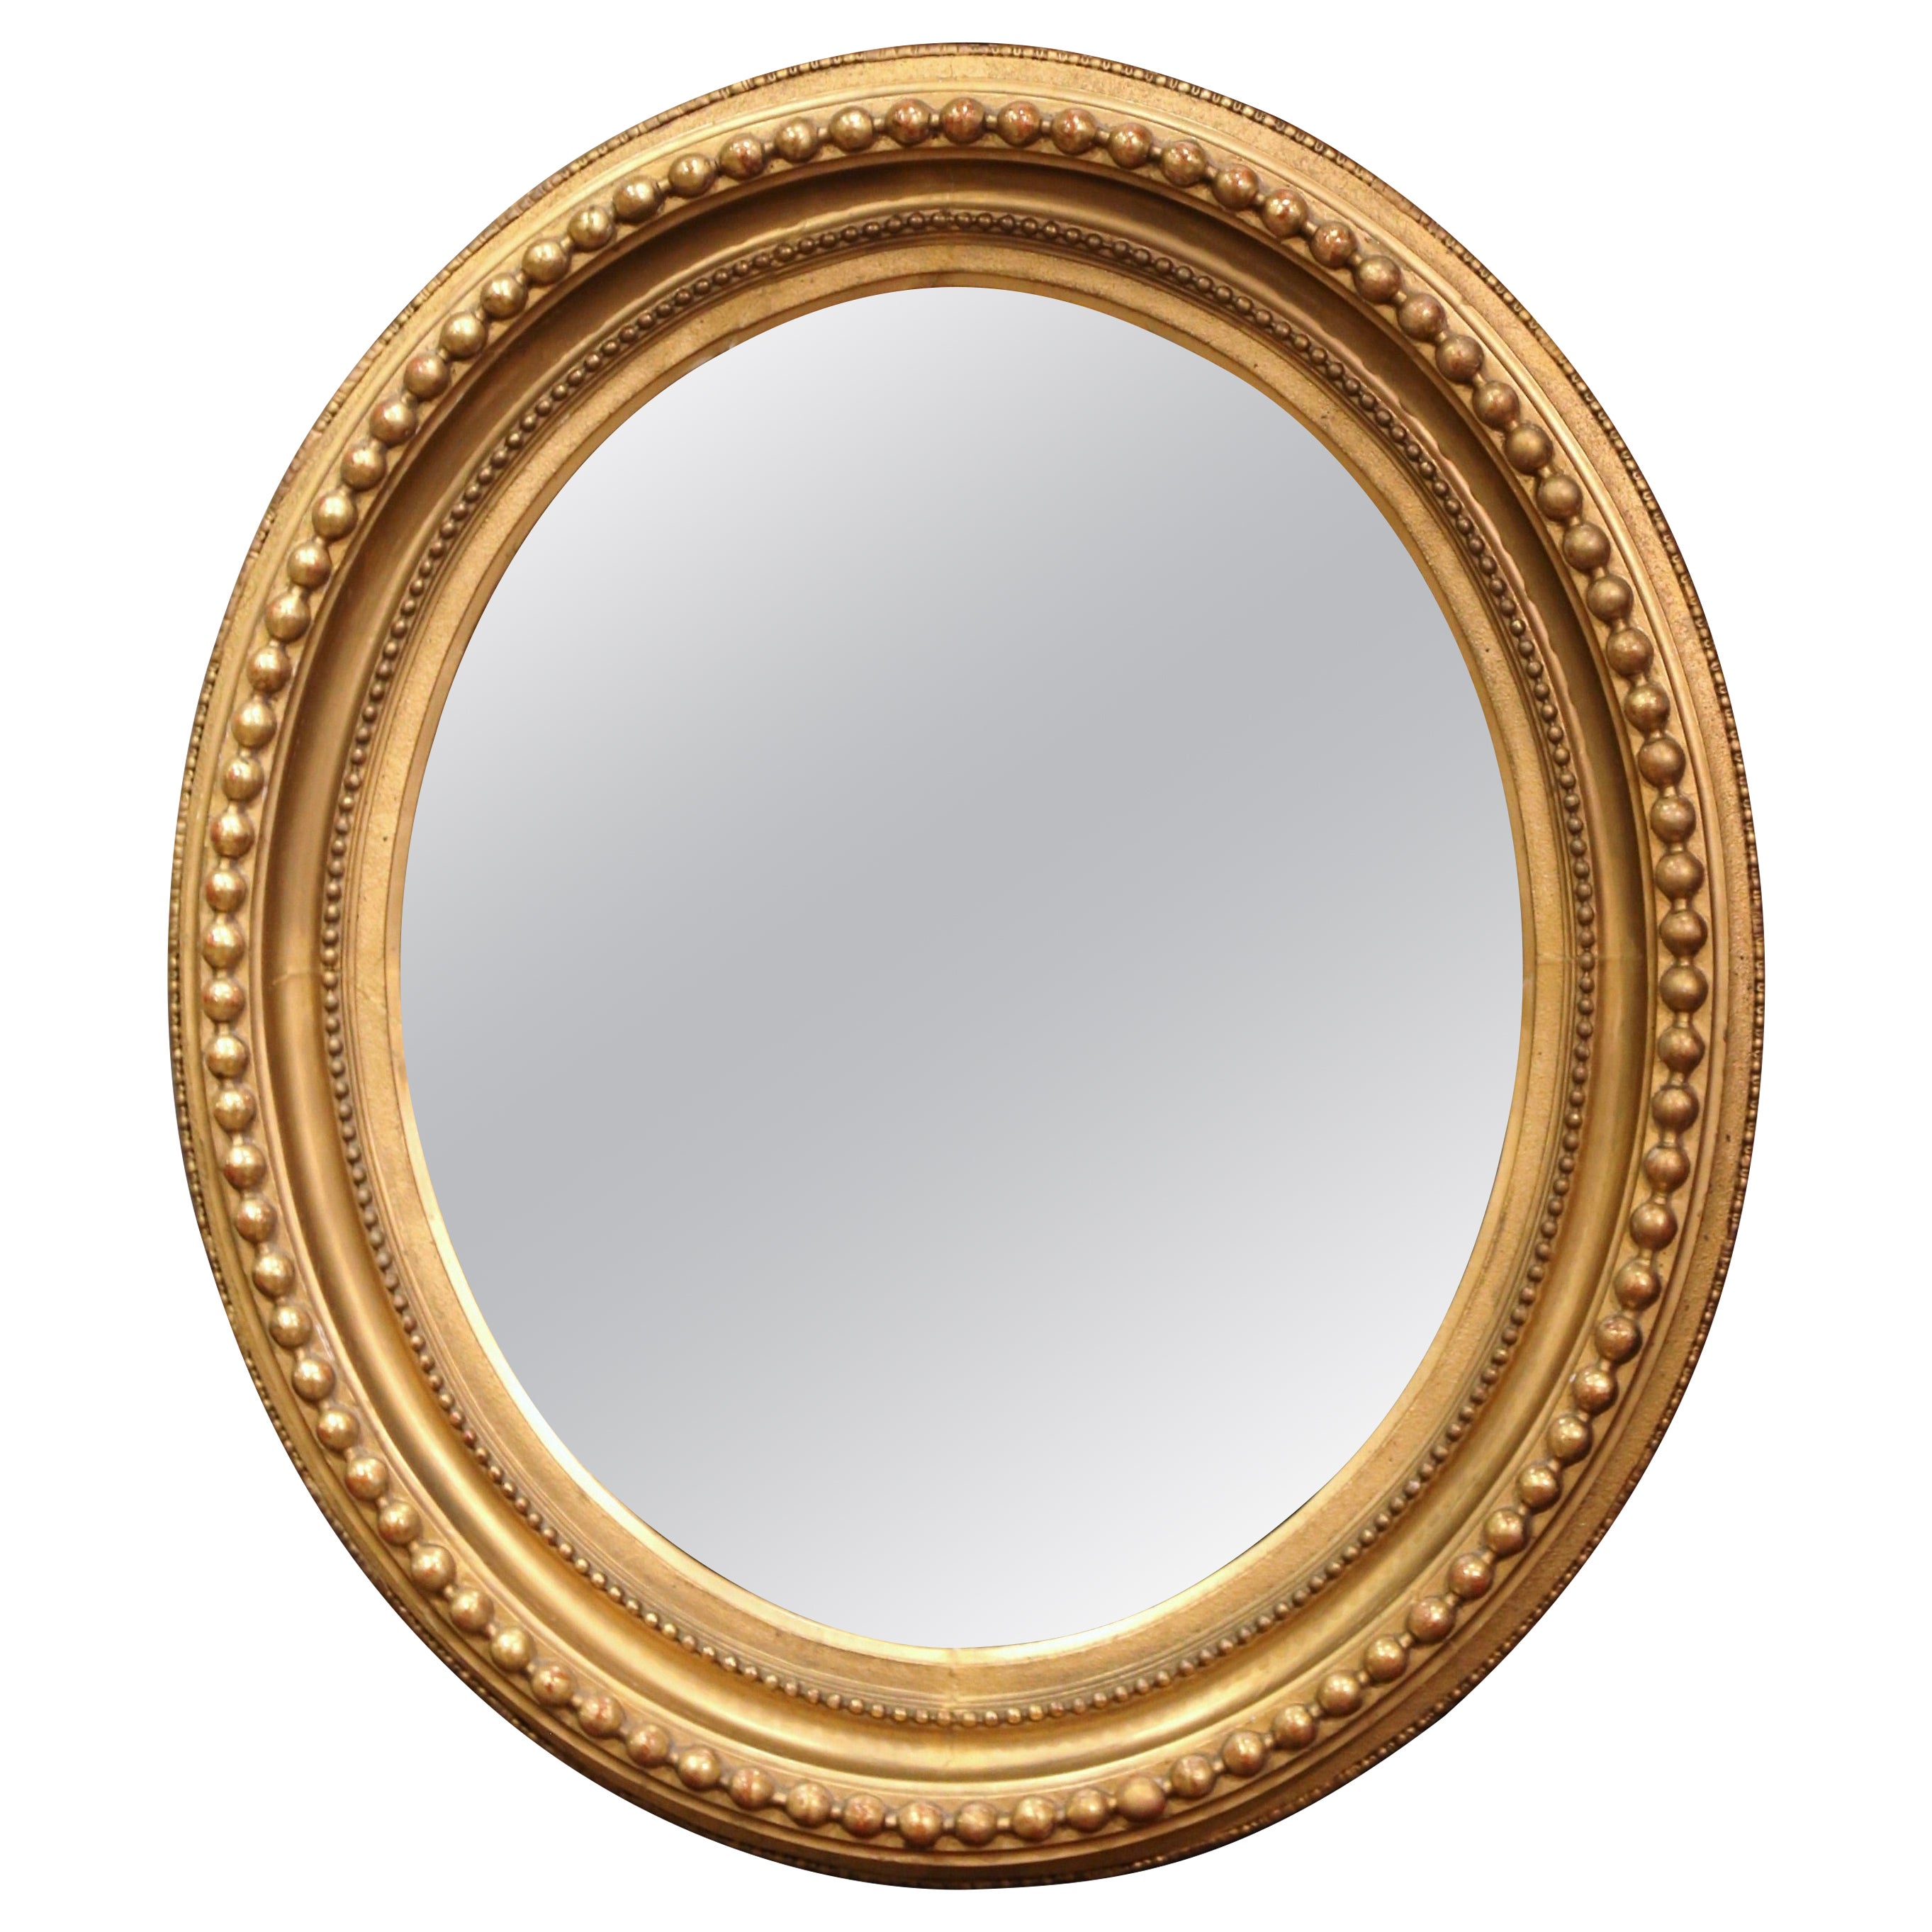 19th Century, French, Napoleon III Carved Giltwood Oval Wall Mirror  For Sale